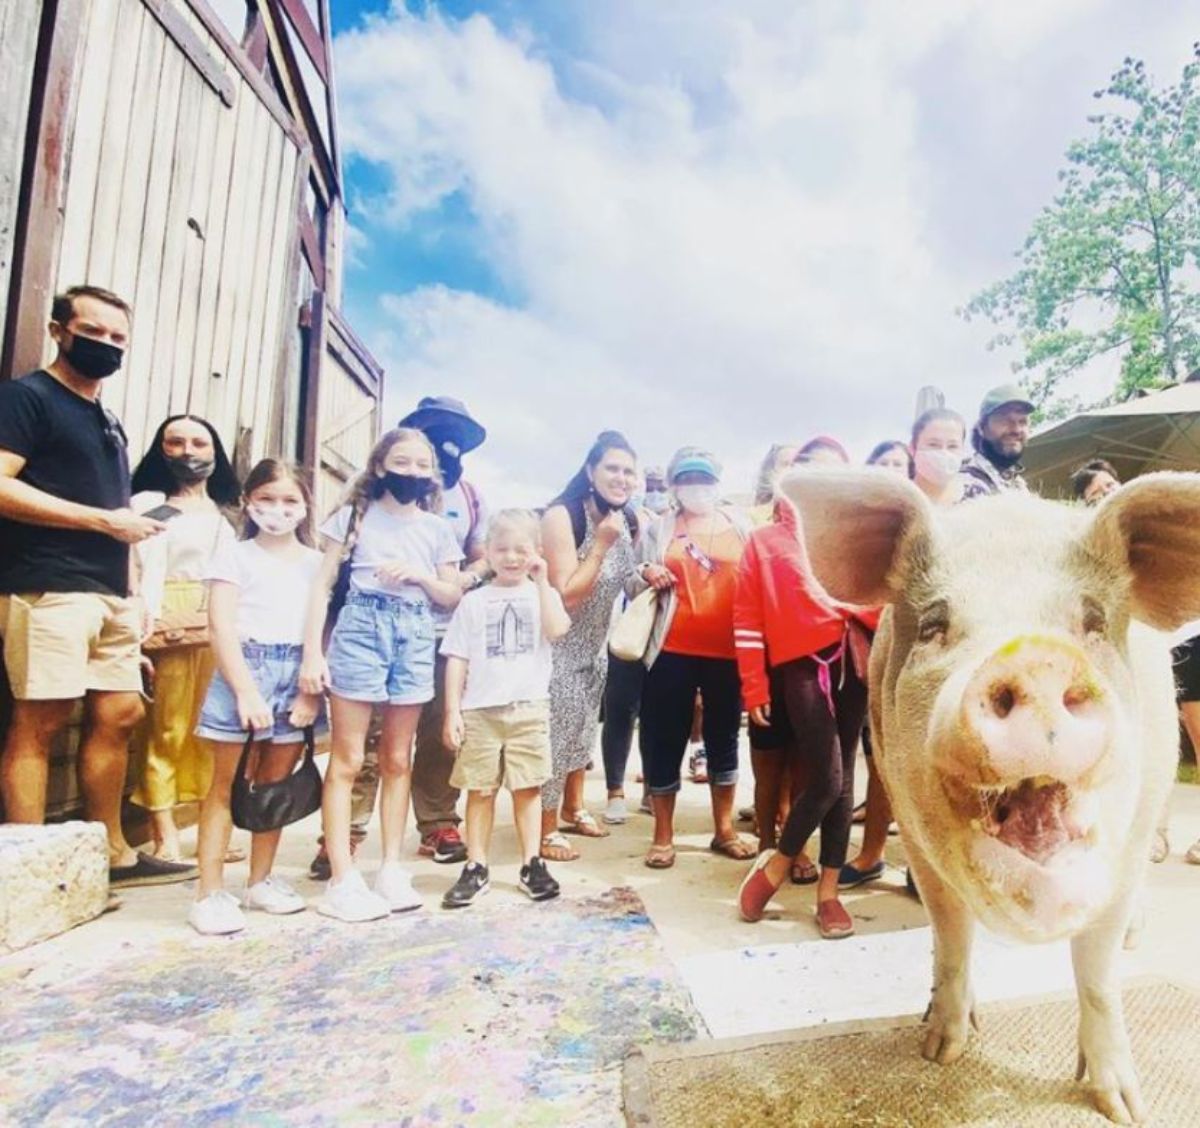 white pig standing in front of a group of adults and children